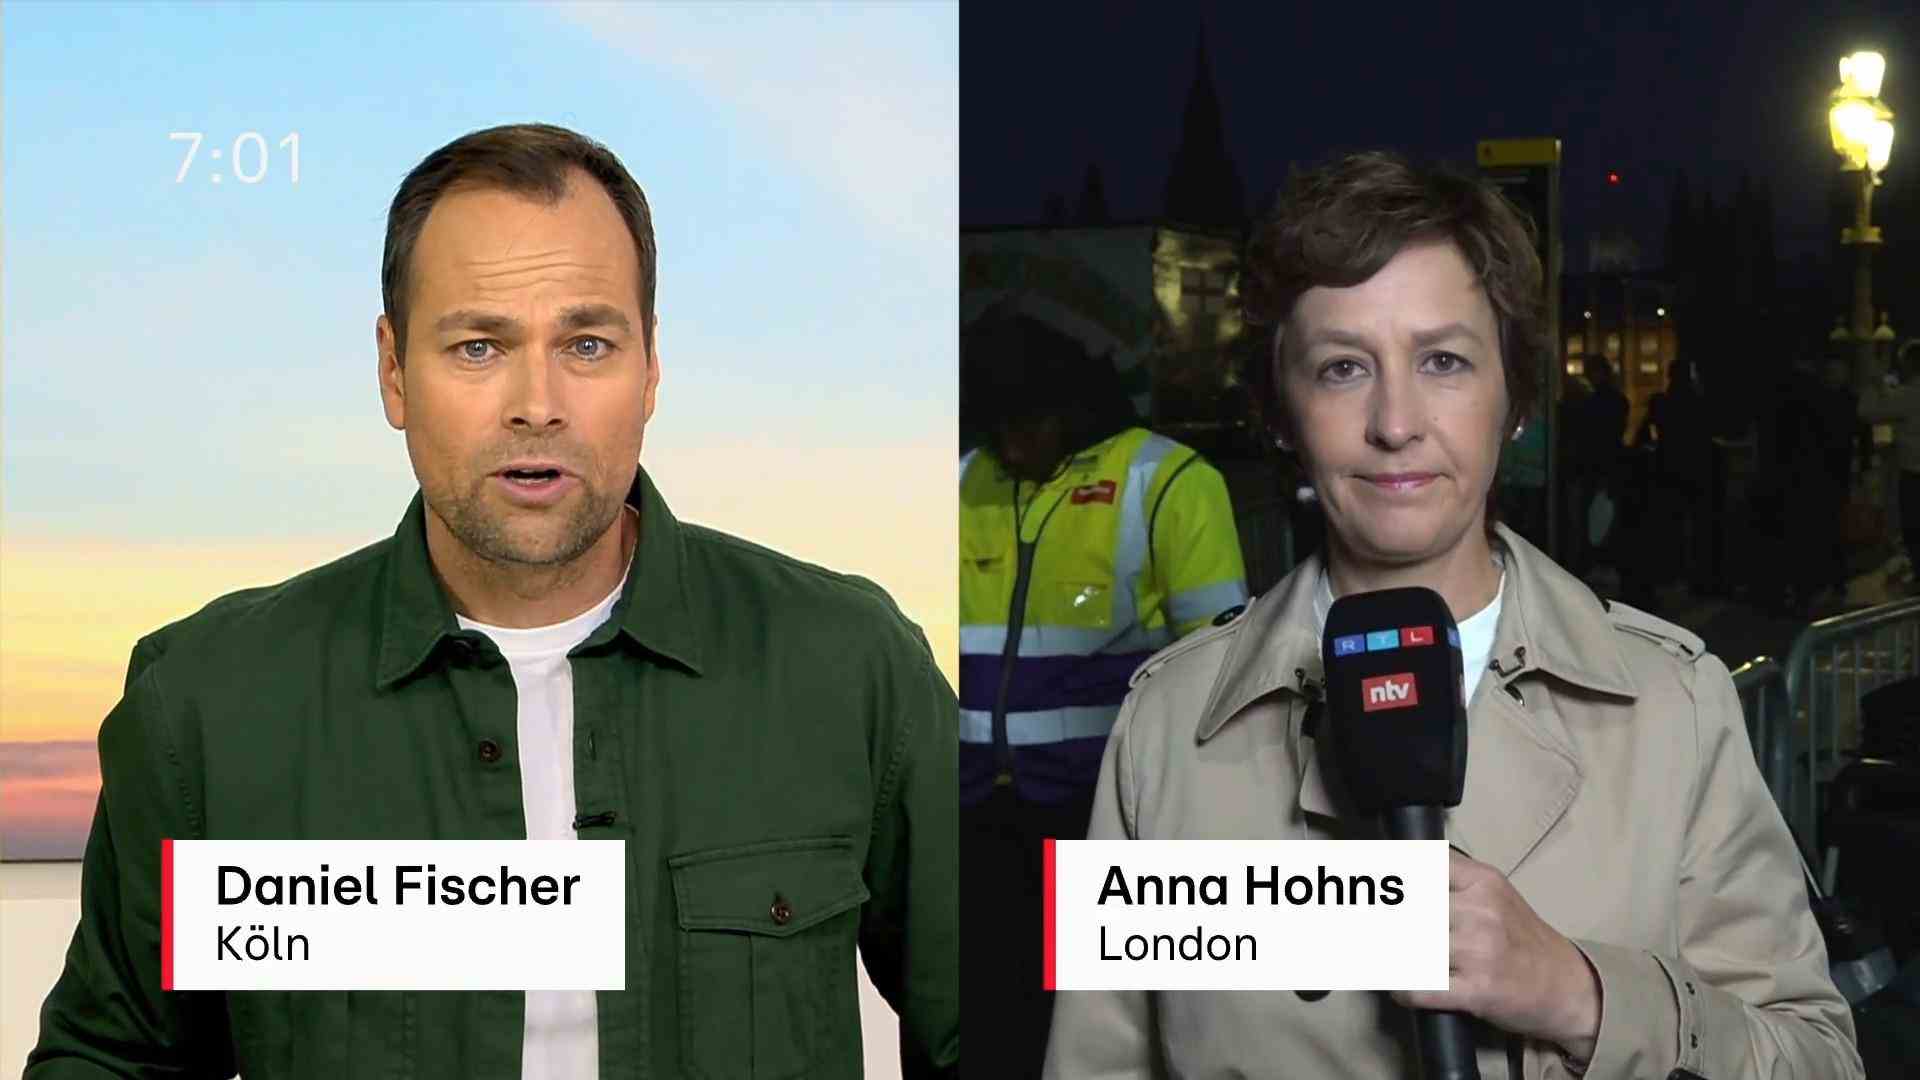 Hours of queuing for Queen's farewell RTL reporter live from London